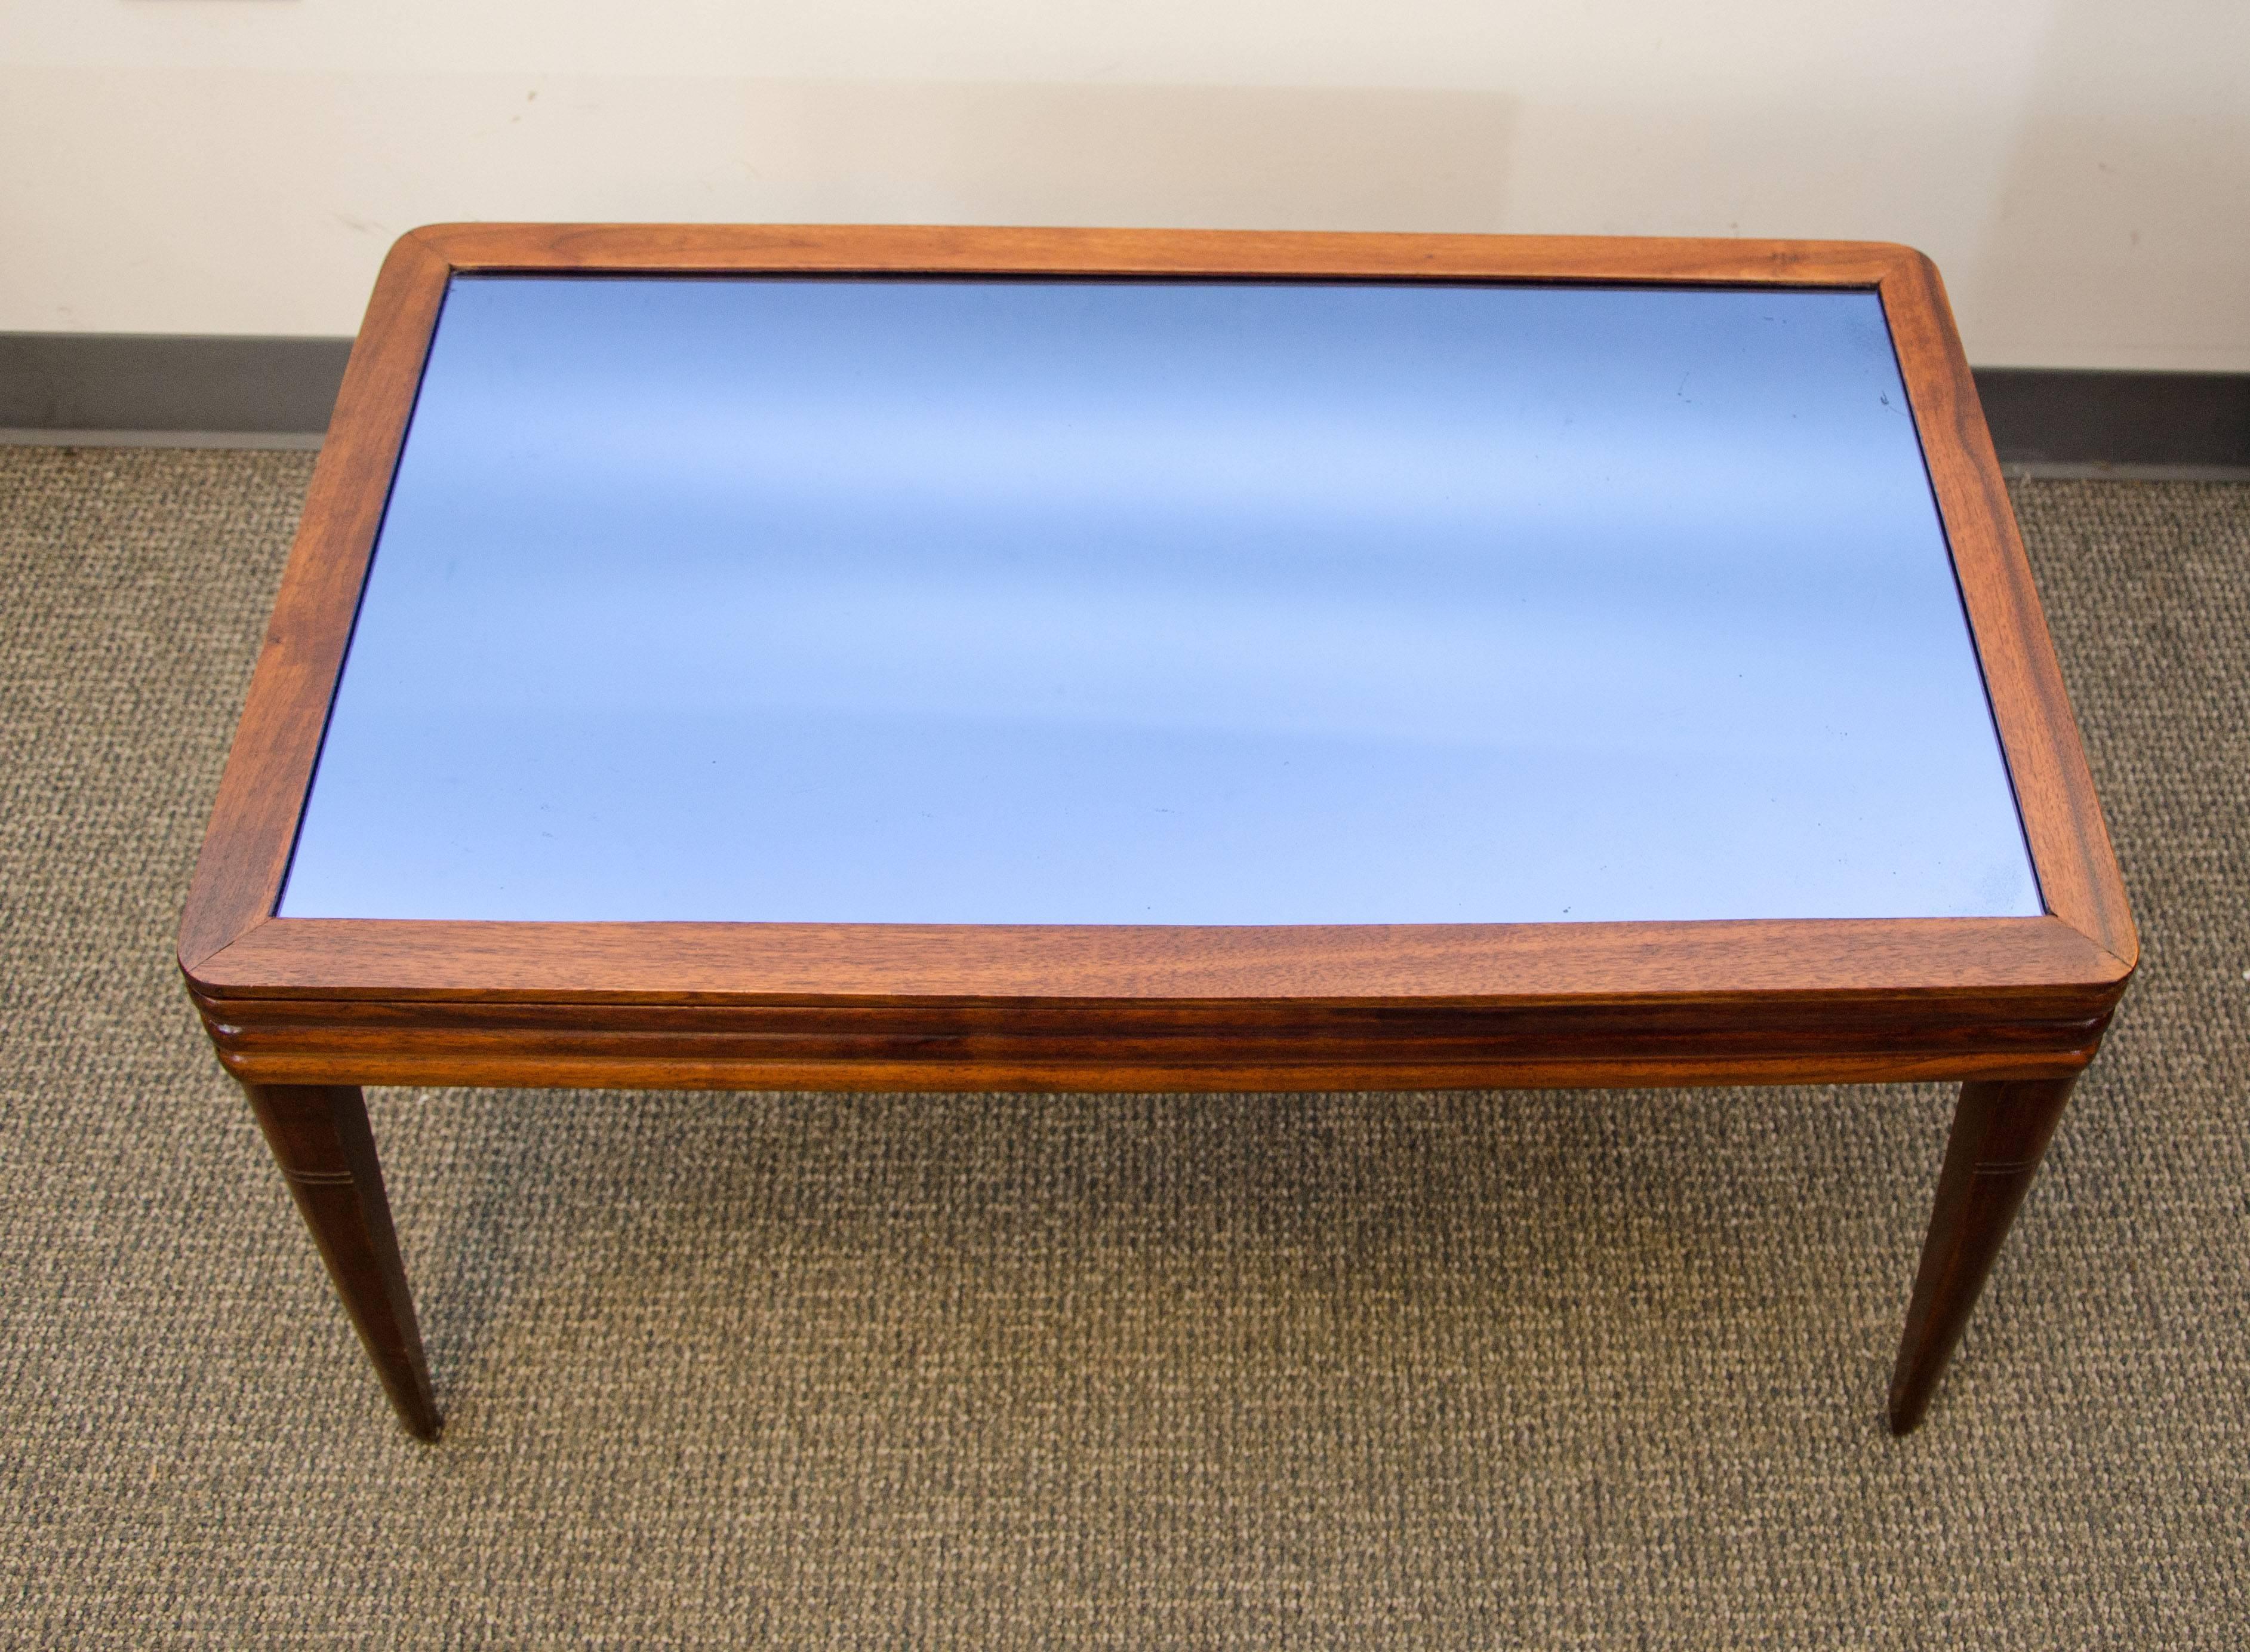  Art Deco walnut coffee table with a very simple design. It retains the original vintage cobalt blue glass top. It can fit in with many design interiors.